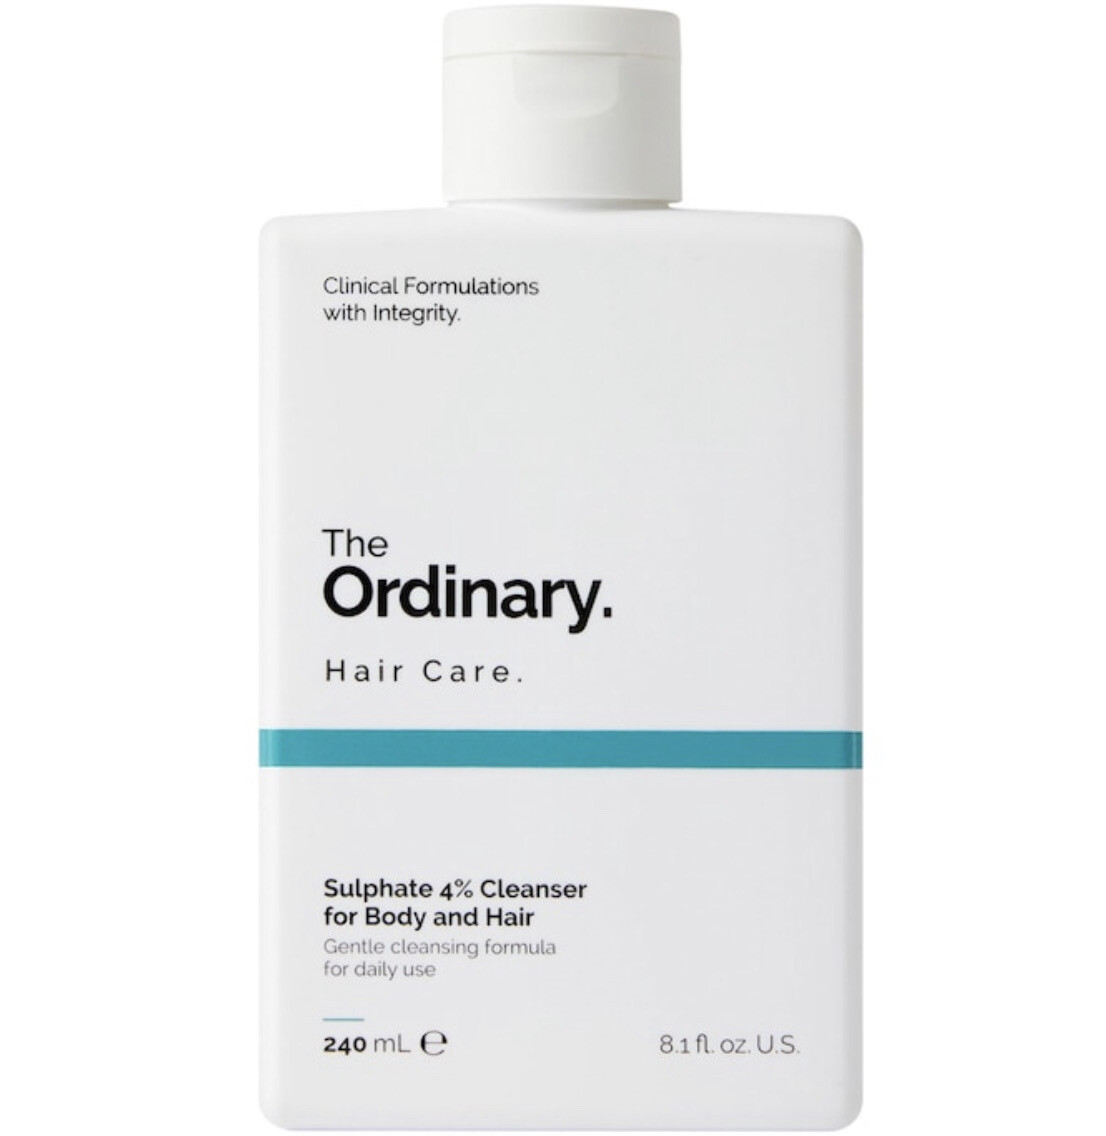 The Ordinary - Sulphate 4% Shampoo Cleanser for Body & Hair